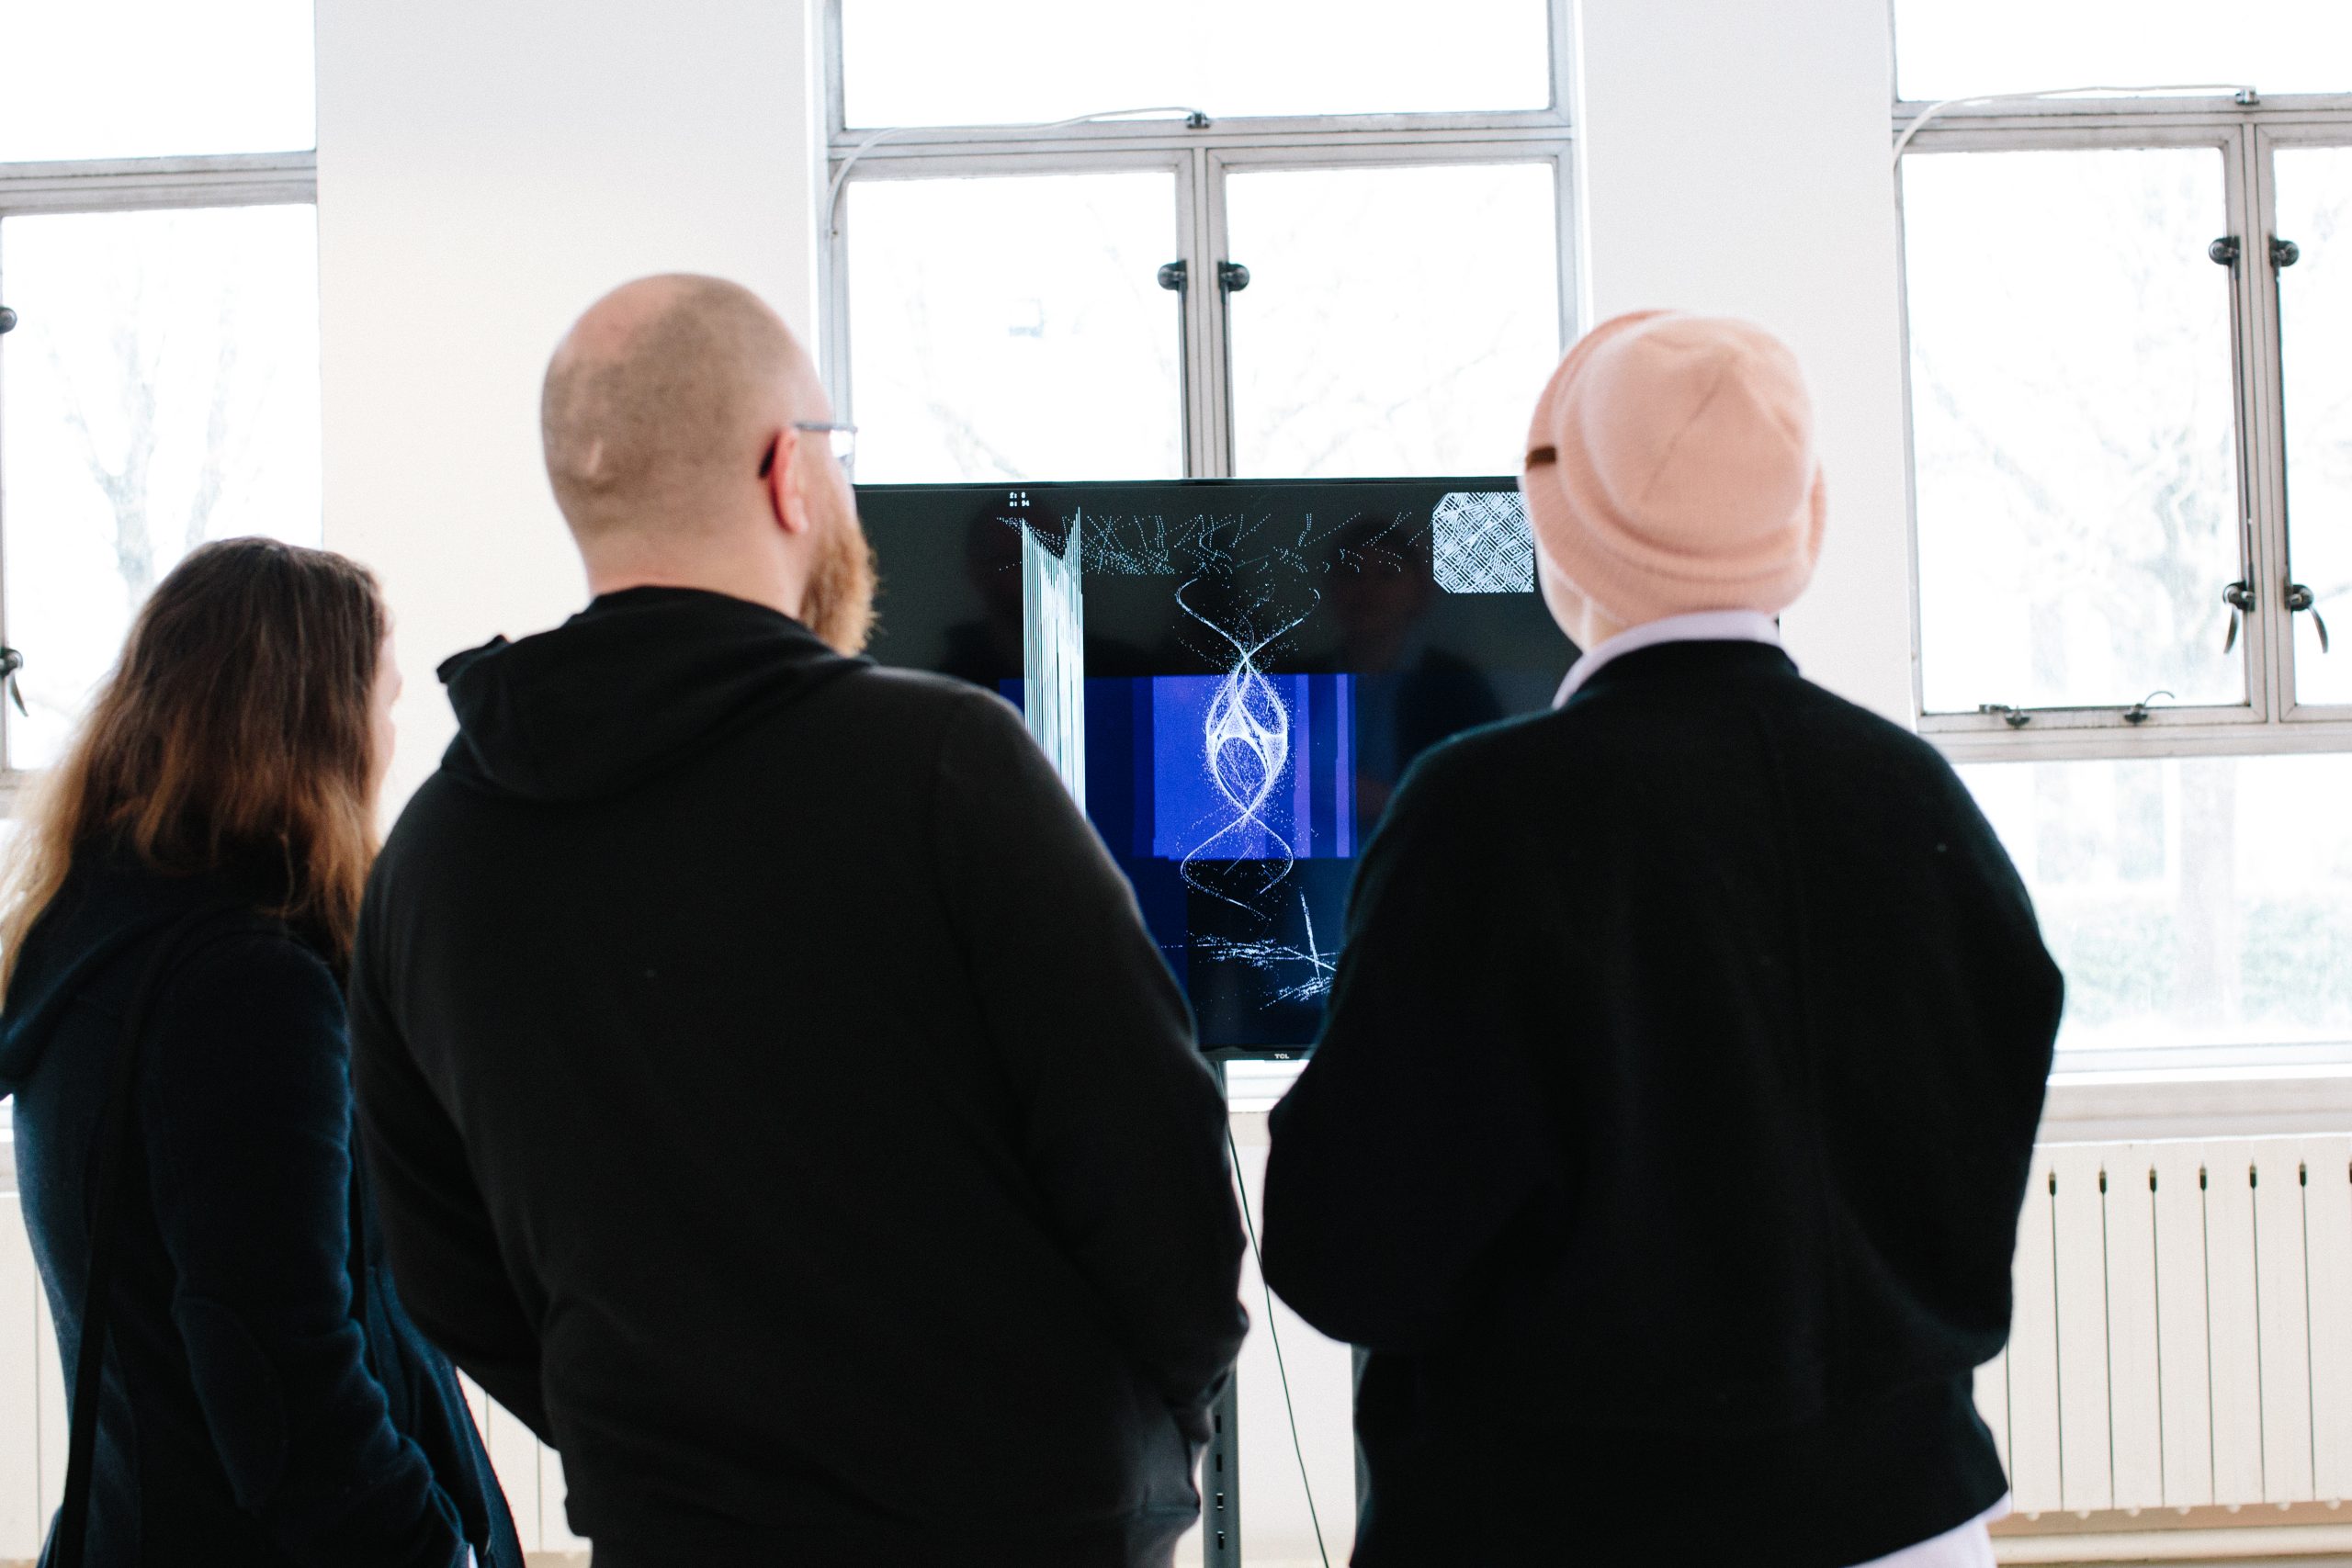 Three people from behind, observing an intricate digital art piece on a monitor in a bright, naturally lit room.